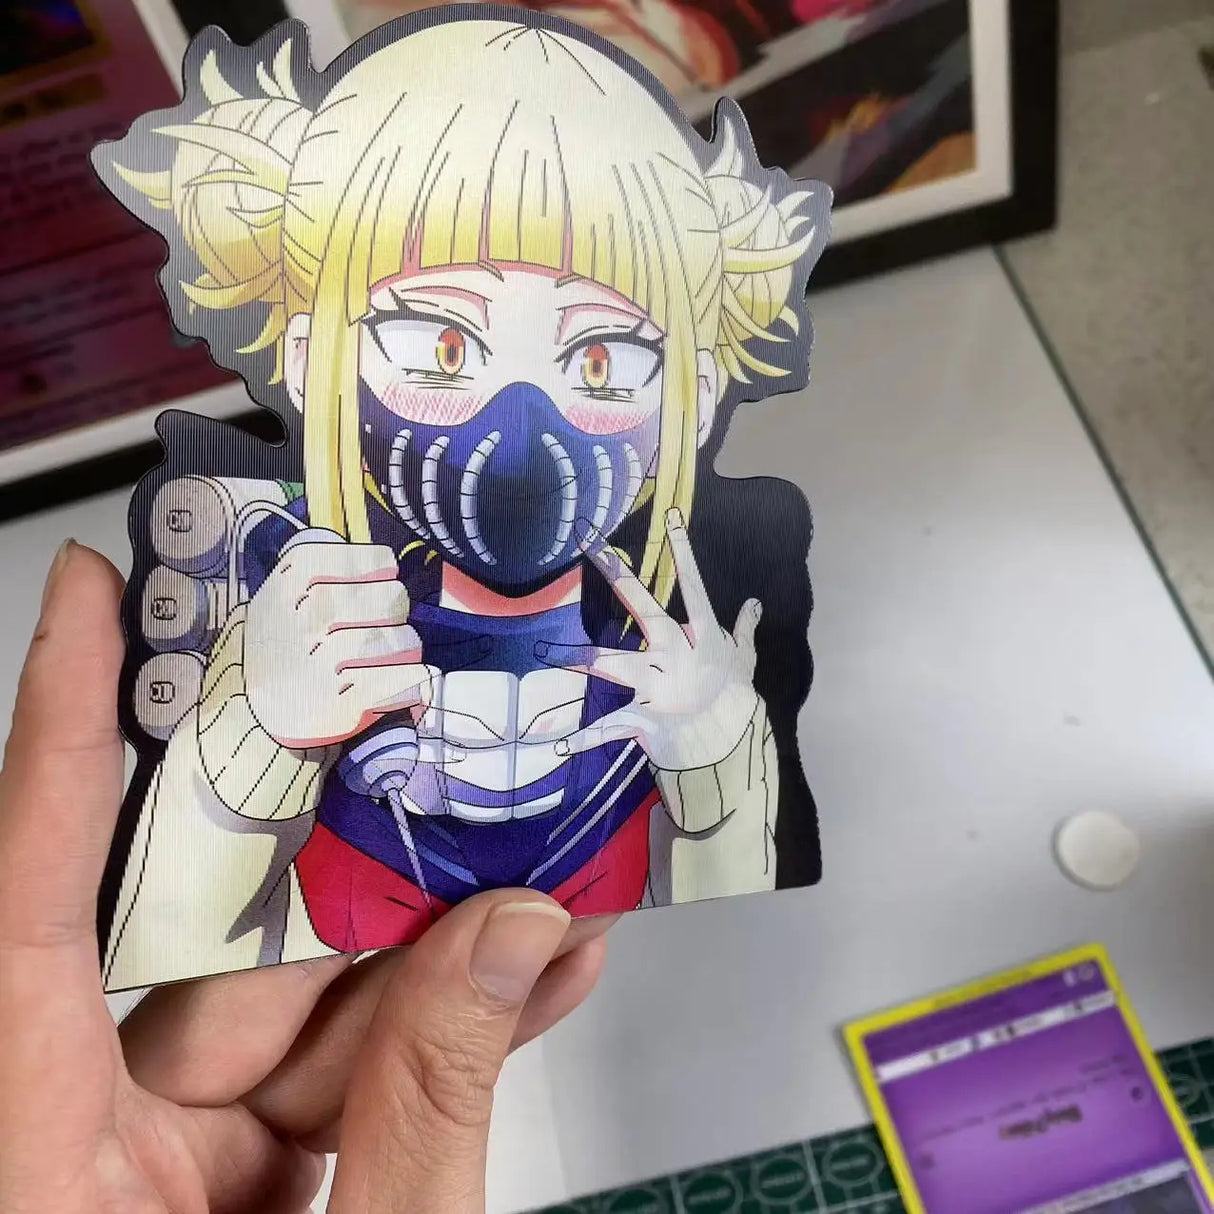 Each sticker shows to depict Himiko in motion, creating a immersive visual effect. If you are looking for more Academia Merch, We have it all! | Check out all our Anime Merch now!